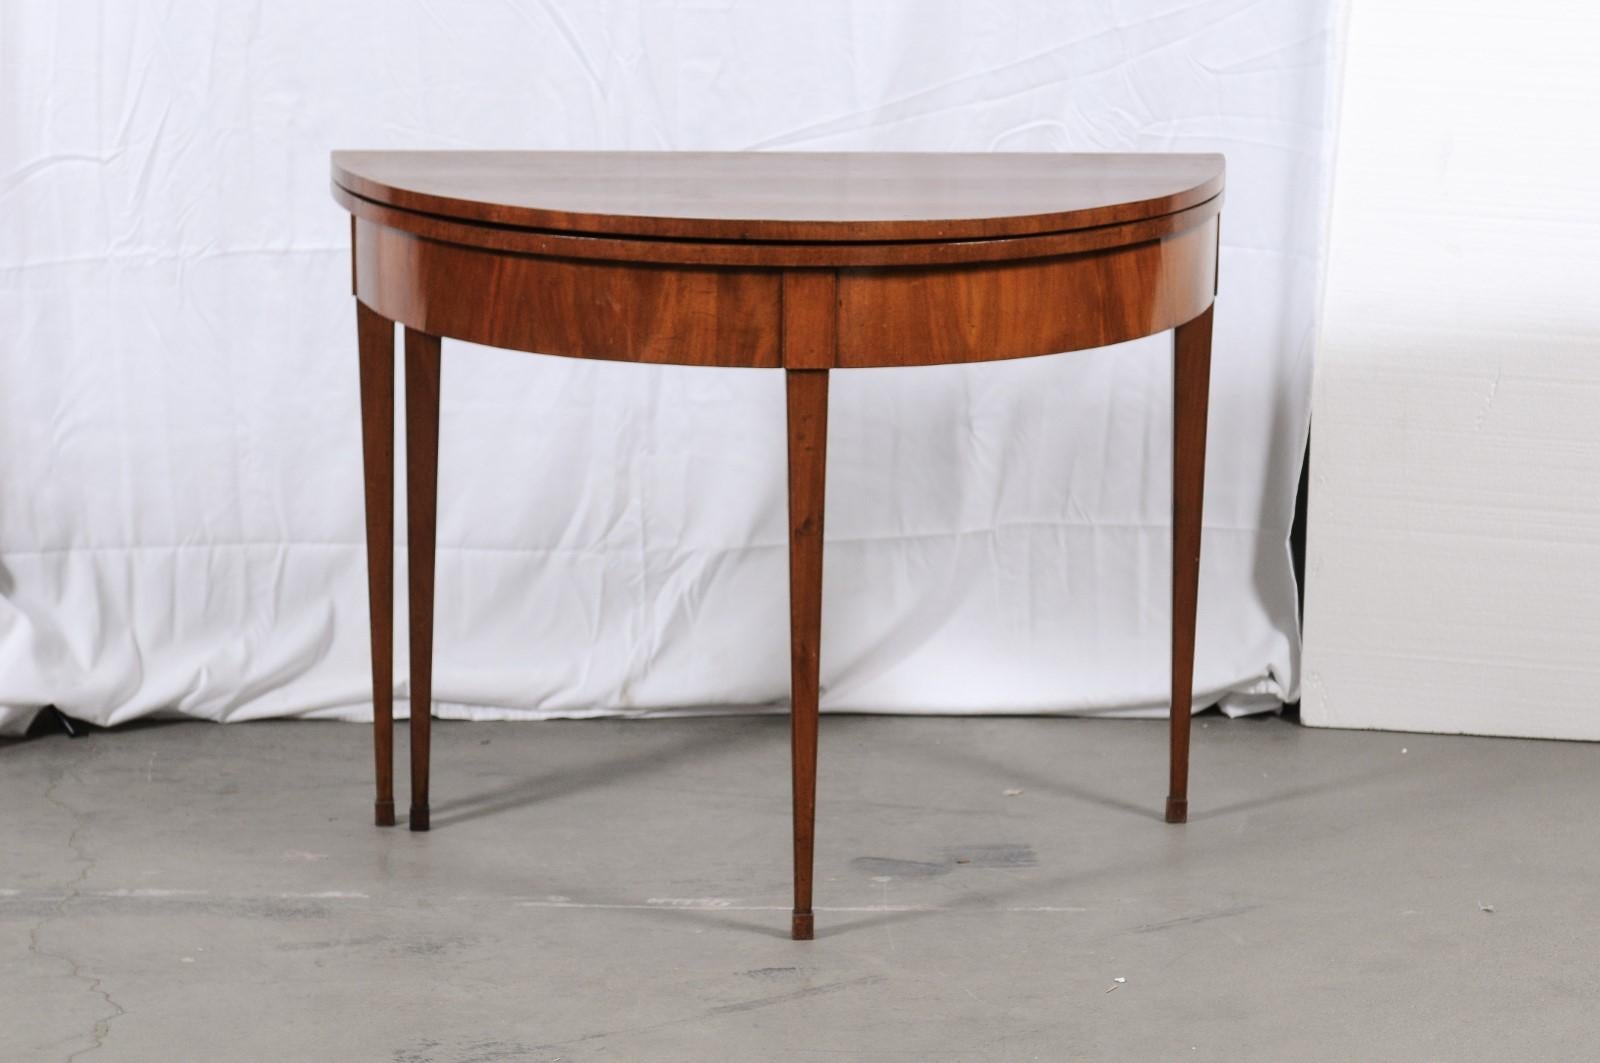 American, first quarter 19th century; probably Mid-Atlantic. A Hepplewhite Demi-Lune mahogany card table with flip top, swing leg, raised on square tapered legs with a slight foot. Approx. H 30